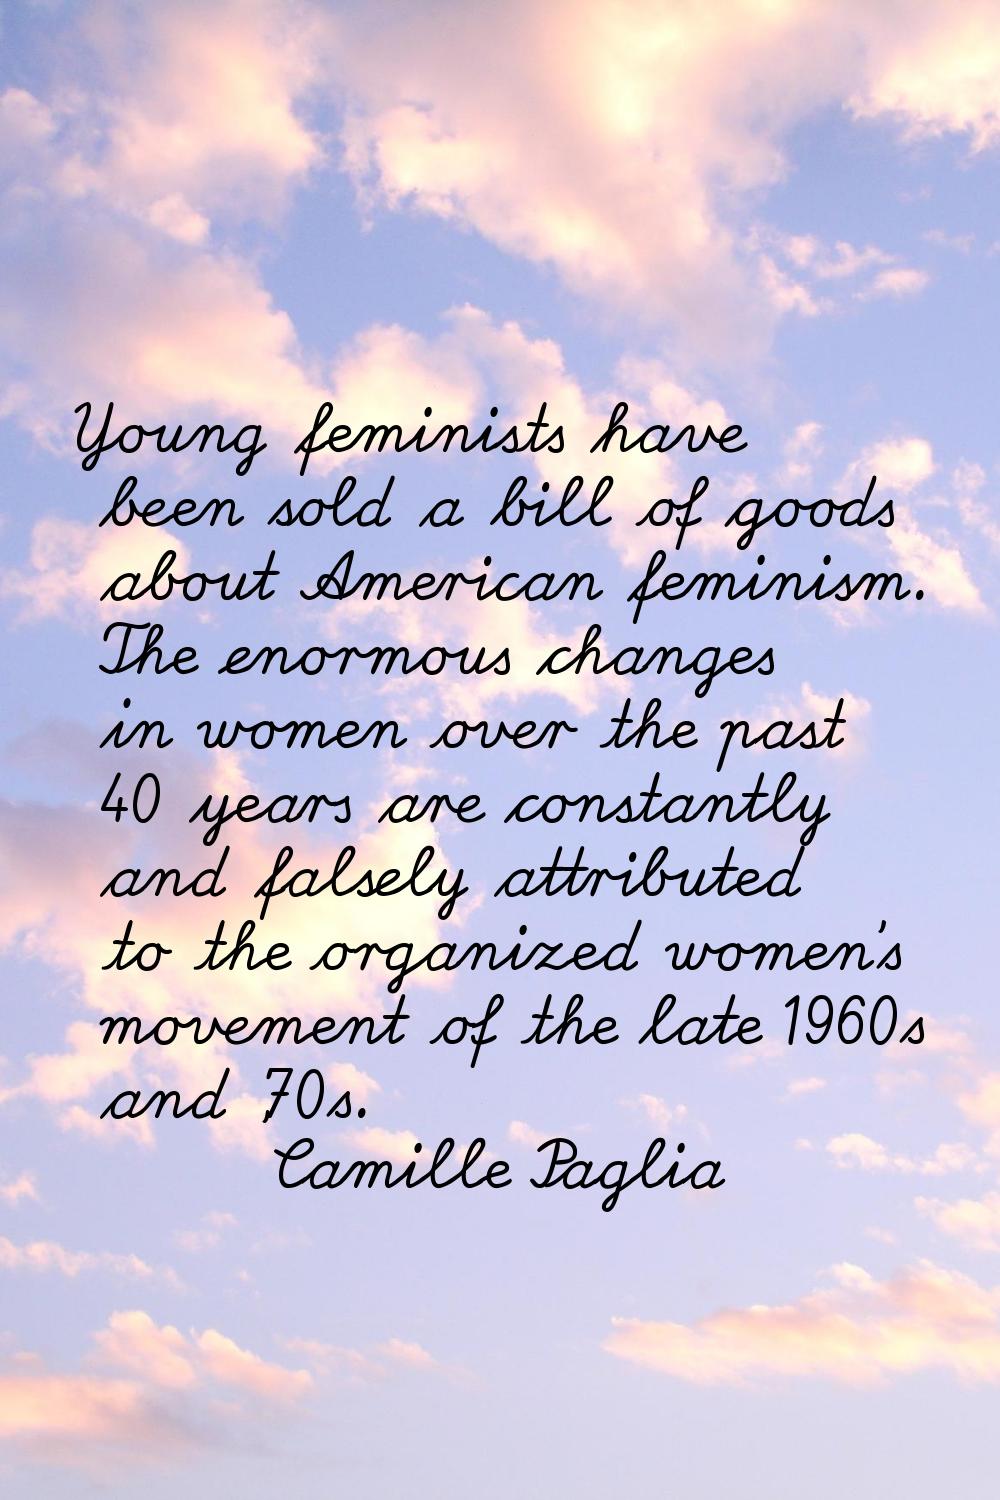 Young feminists have been sold a bill of goods about American feminism. The enormous changes in wom